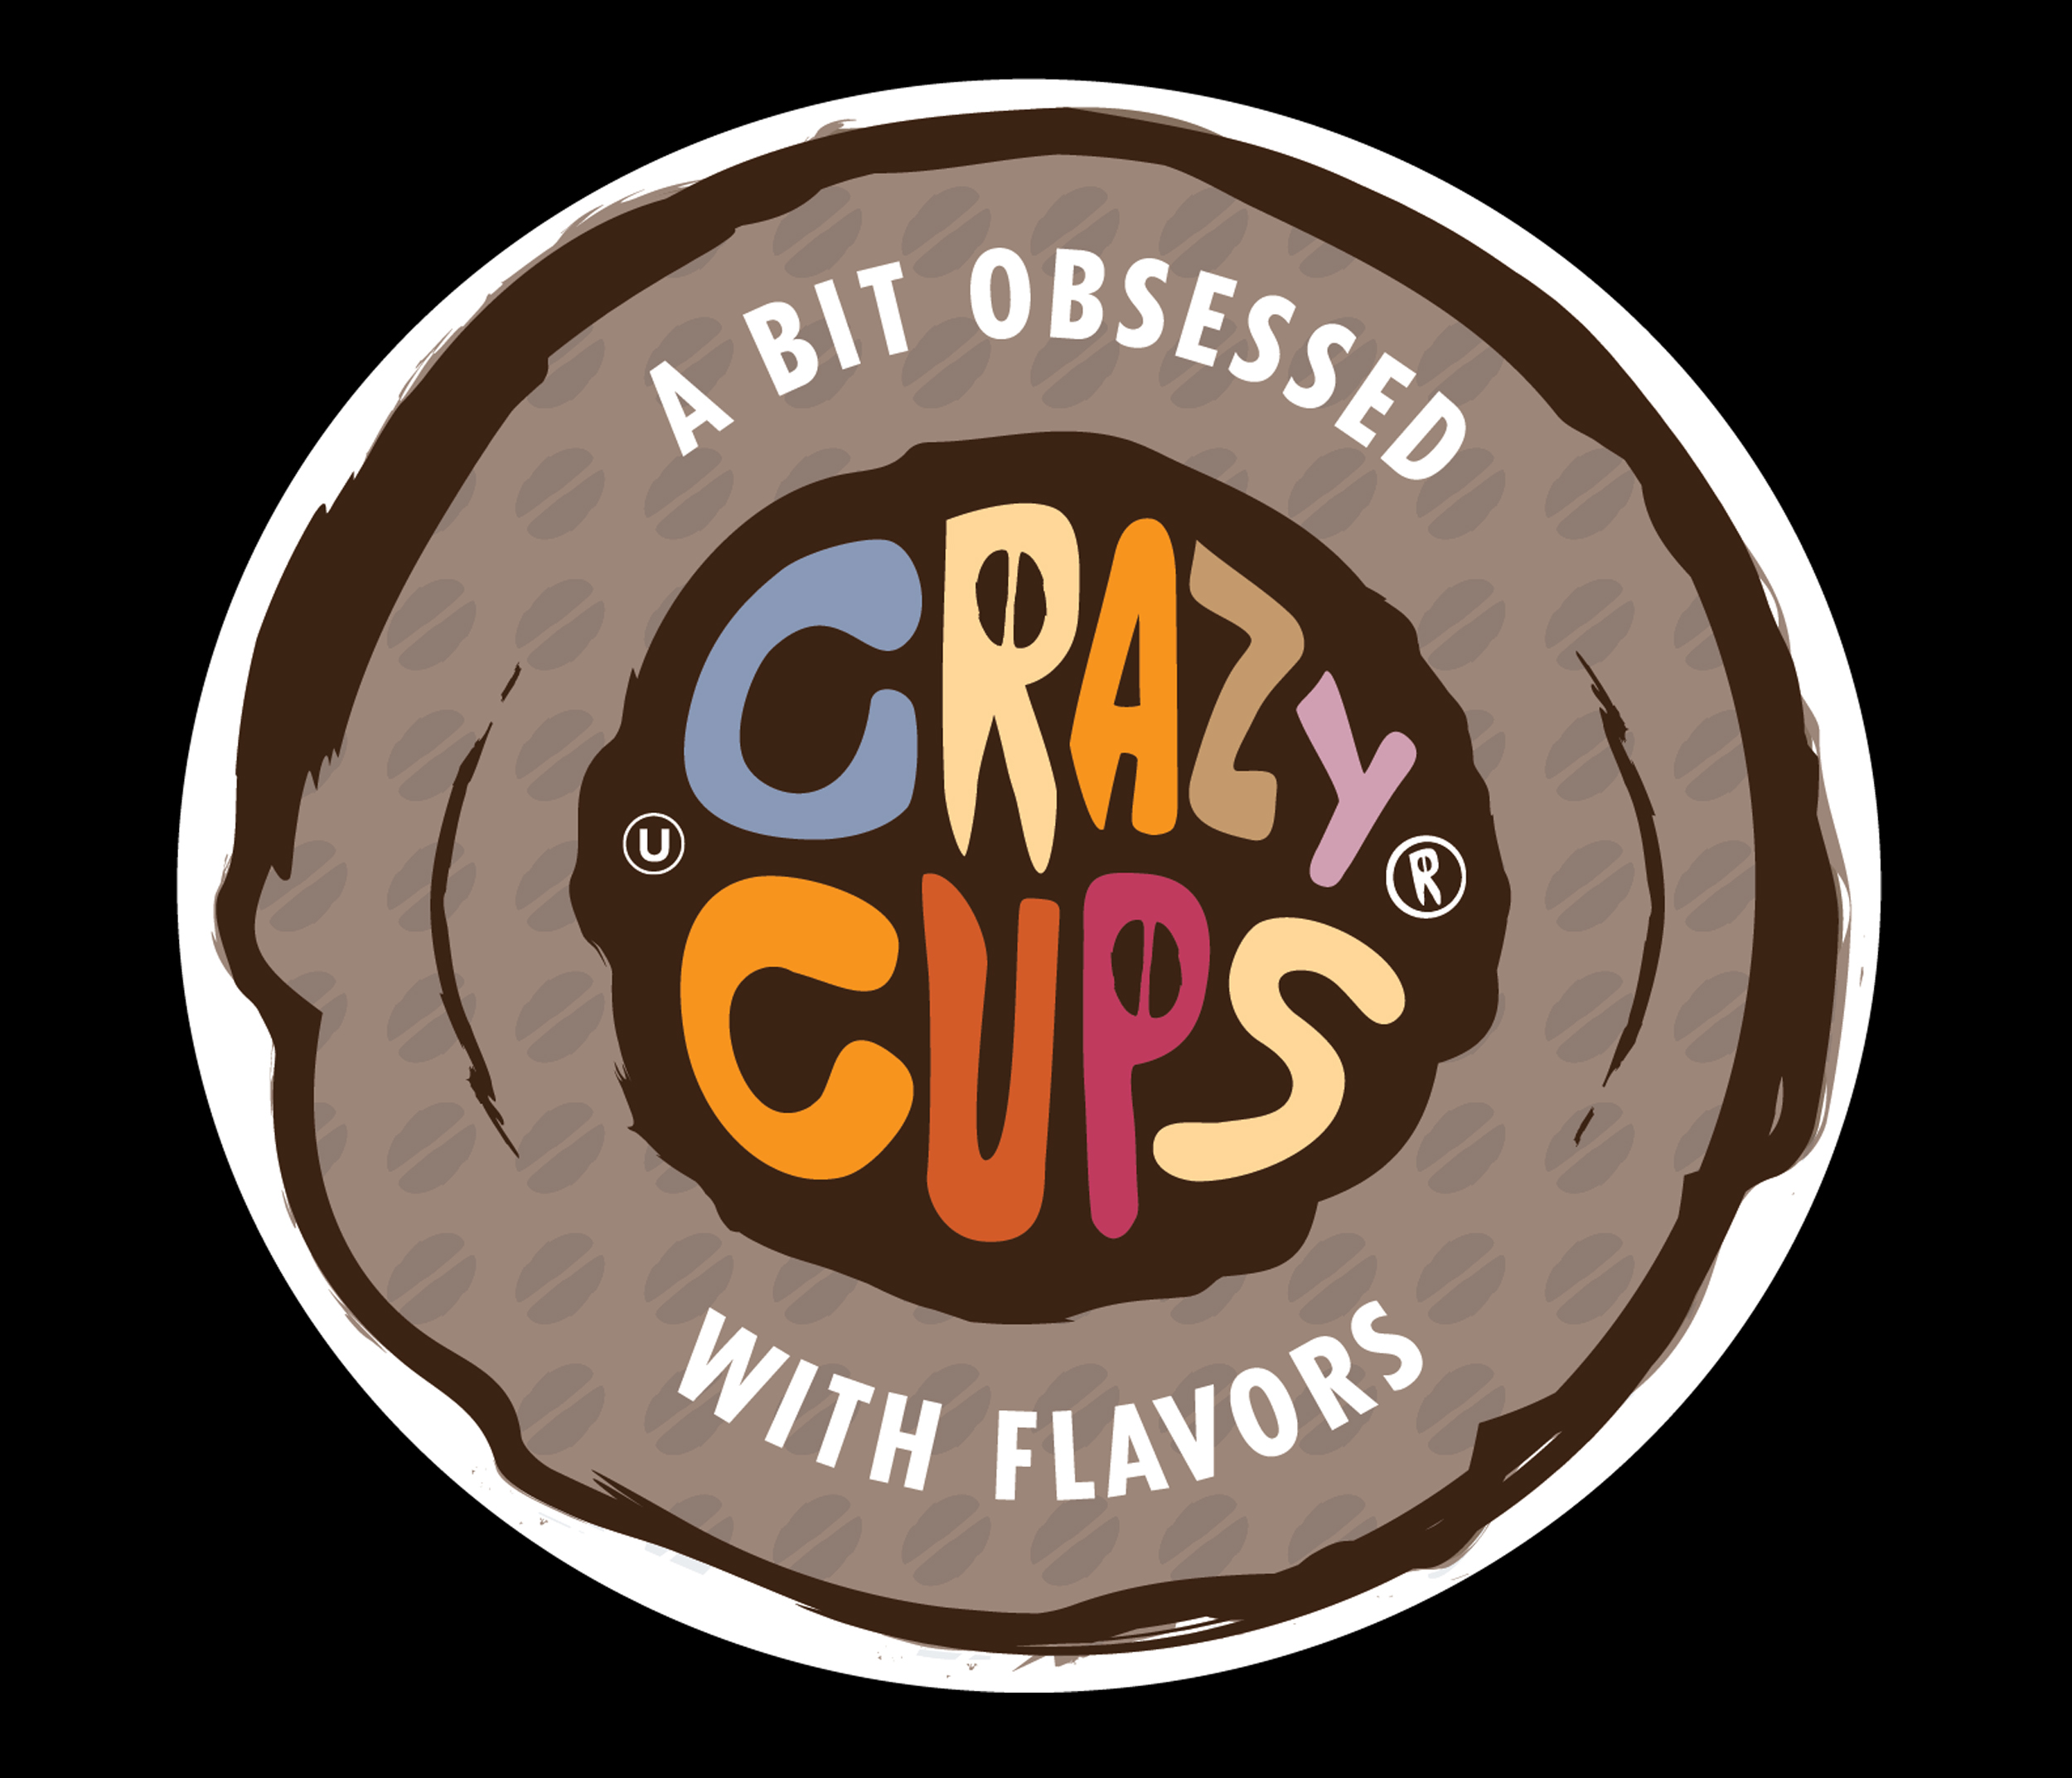 CRAZY CUPS&lt;strong&gt;BRAND POSITIONING &amp; IDENTITY, PACKAGE DESIGN, DIGITAL ADVERTISING, SOCIAL MEDIA, PRODUCT DEVELOPMENT&lt;/strong&gt;&lt;a href="/crazy-cups"&gt;More&lt;/a&gt;